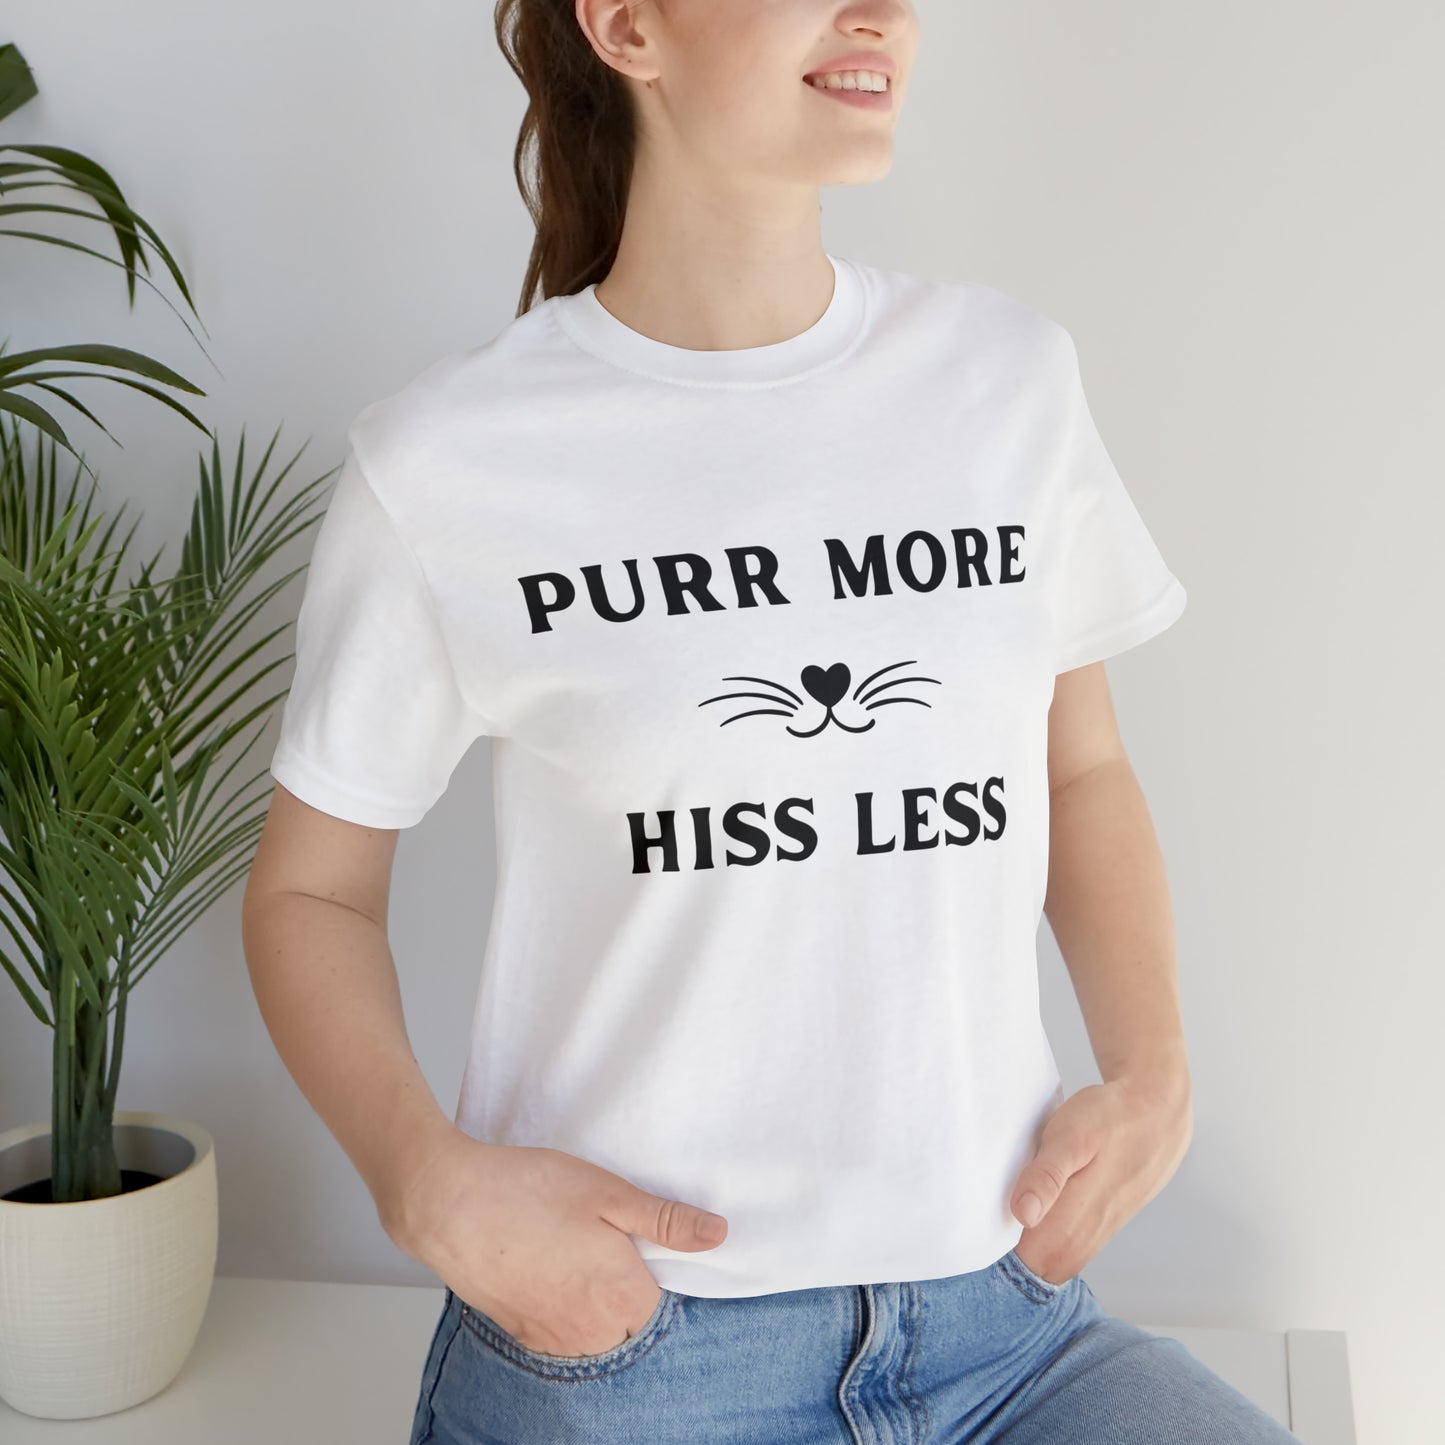 "Purr more, Hiss less Cat Lover's Humorous Positive Quote Unisex Jersey T-Shirt"